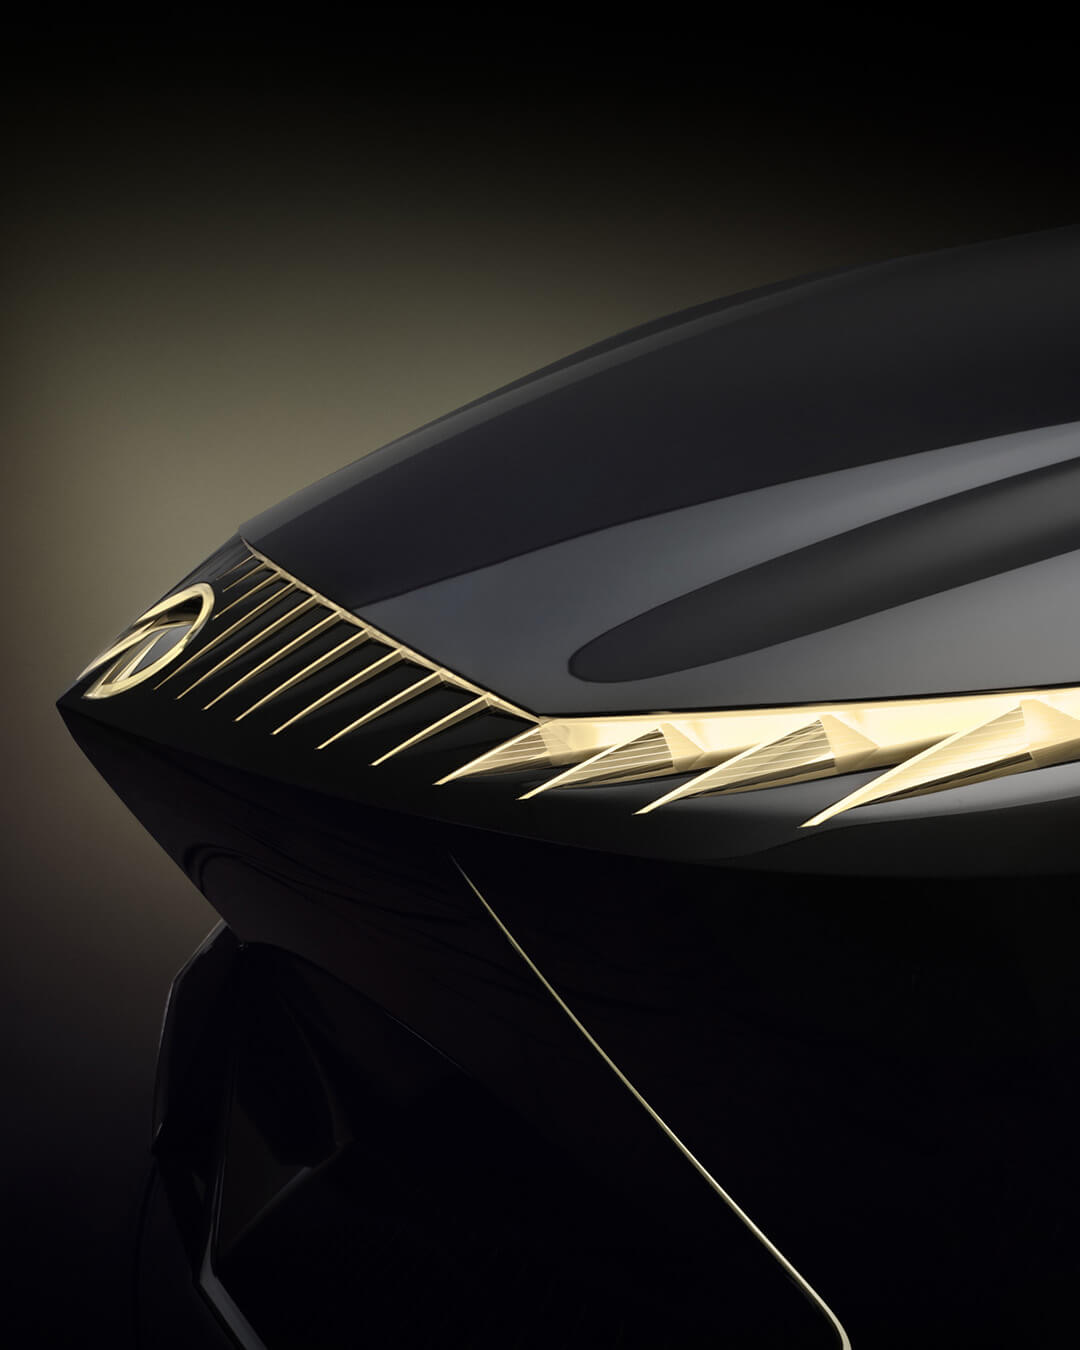 Angled view of the INFINITI Vision Qe electric car’s hood